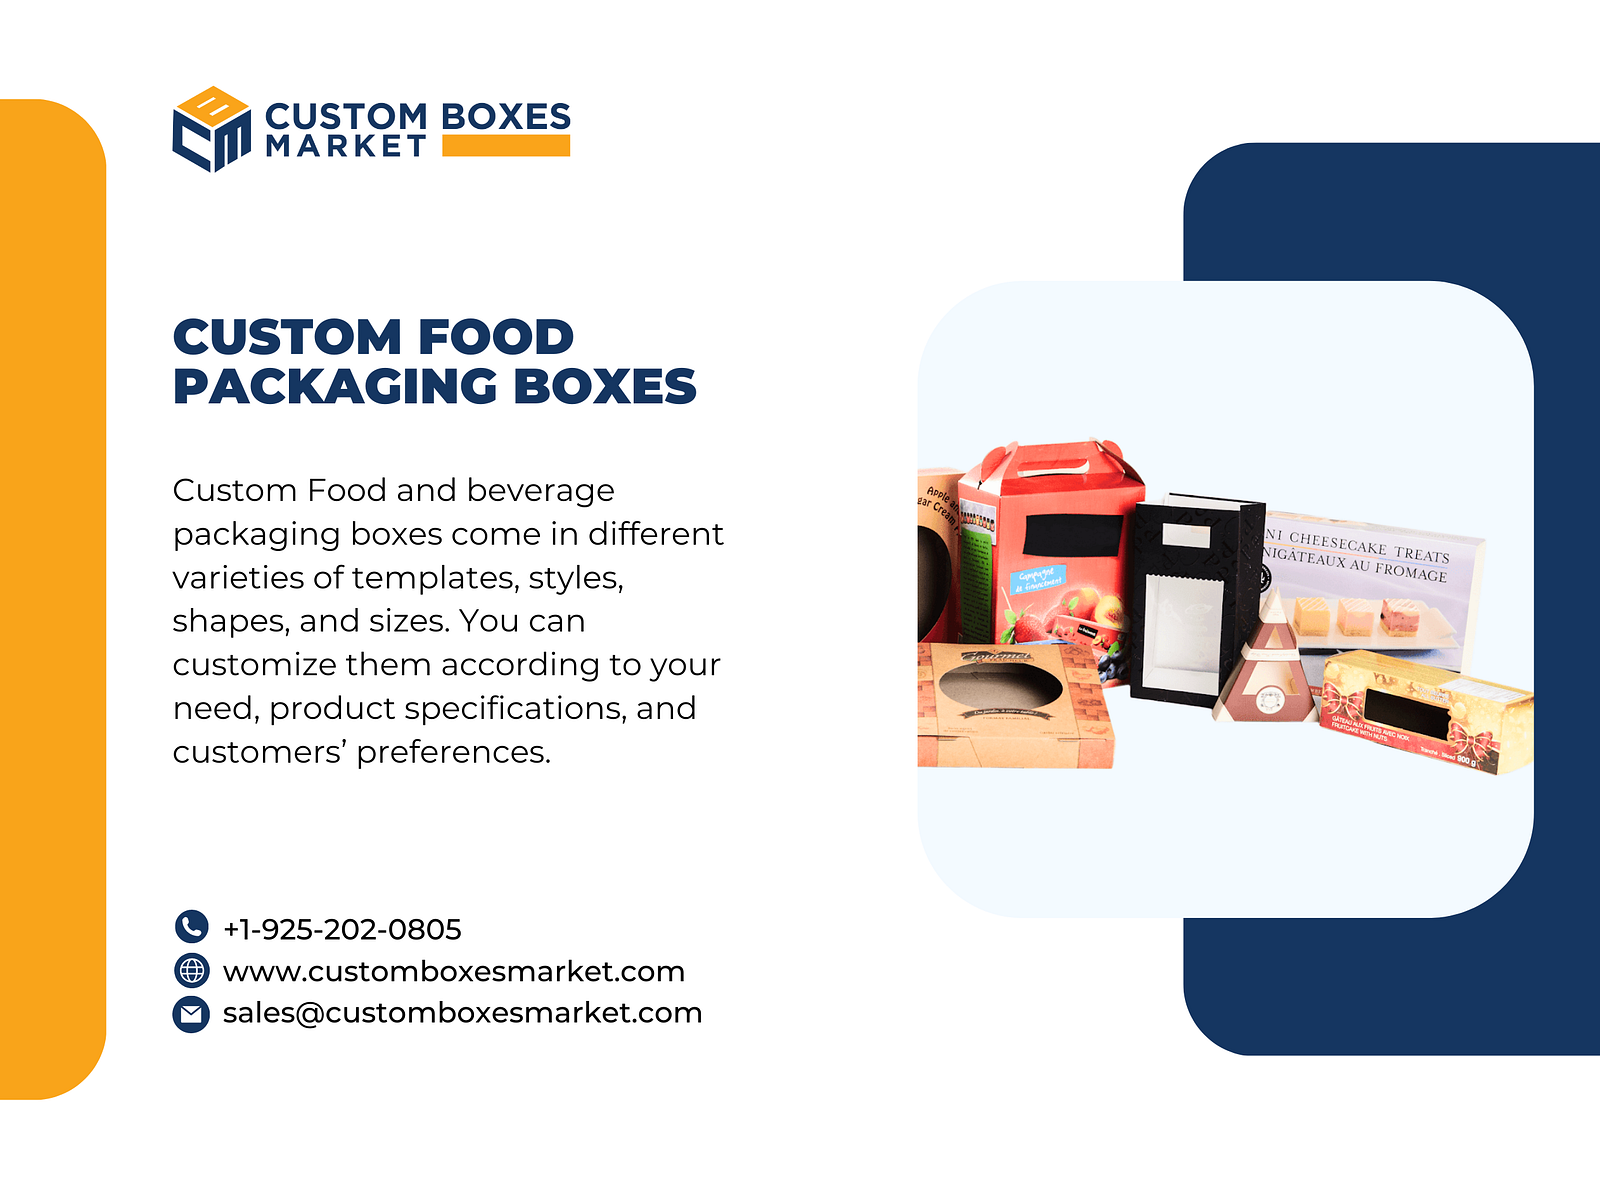 Custom Food Packaging Boxes by Peter Smith on Dribbble